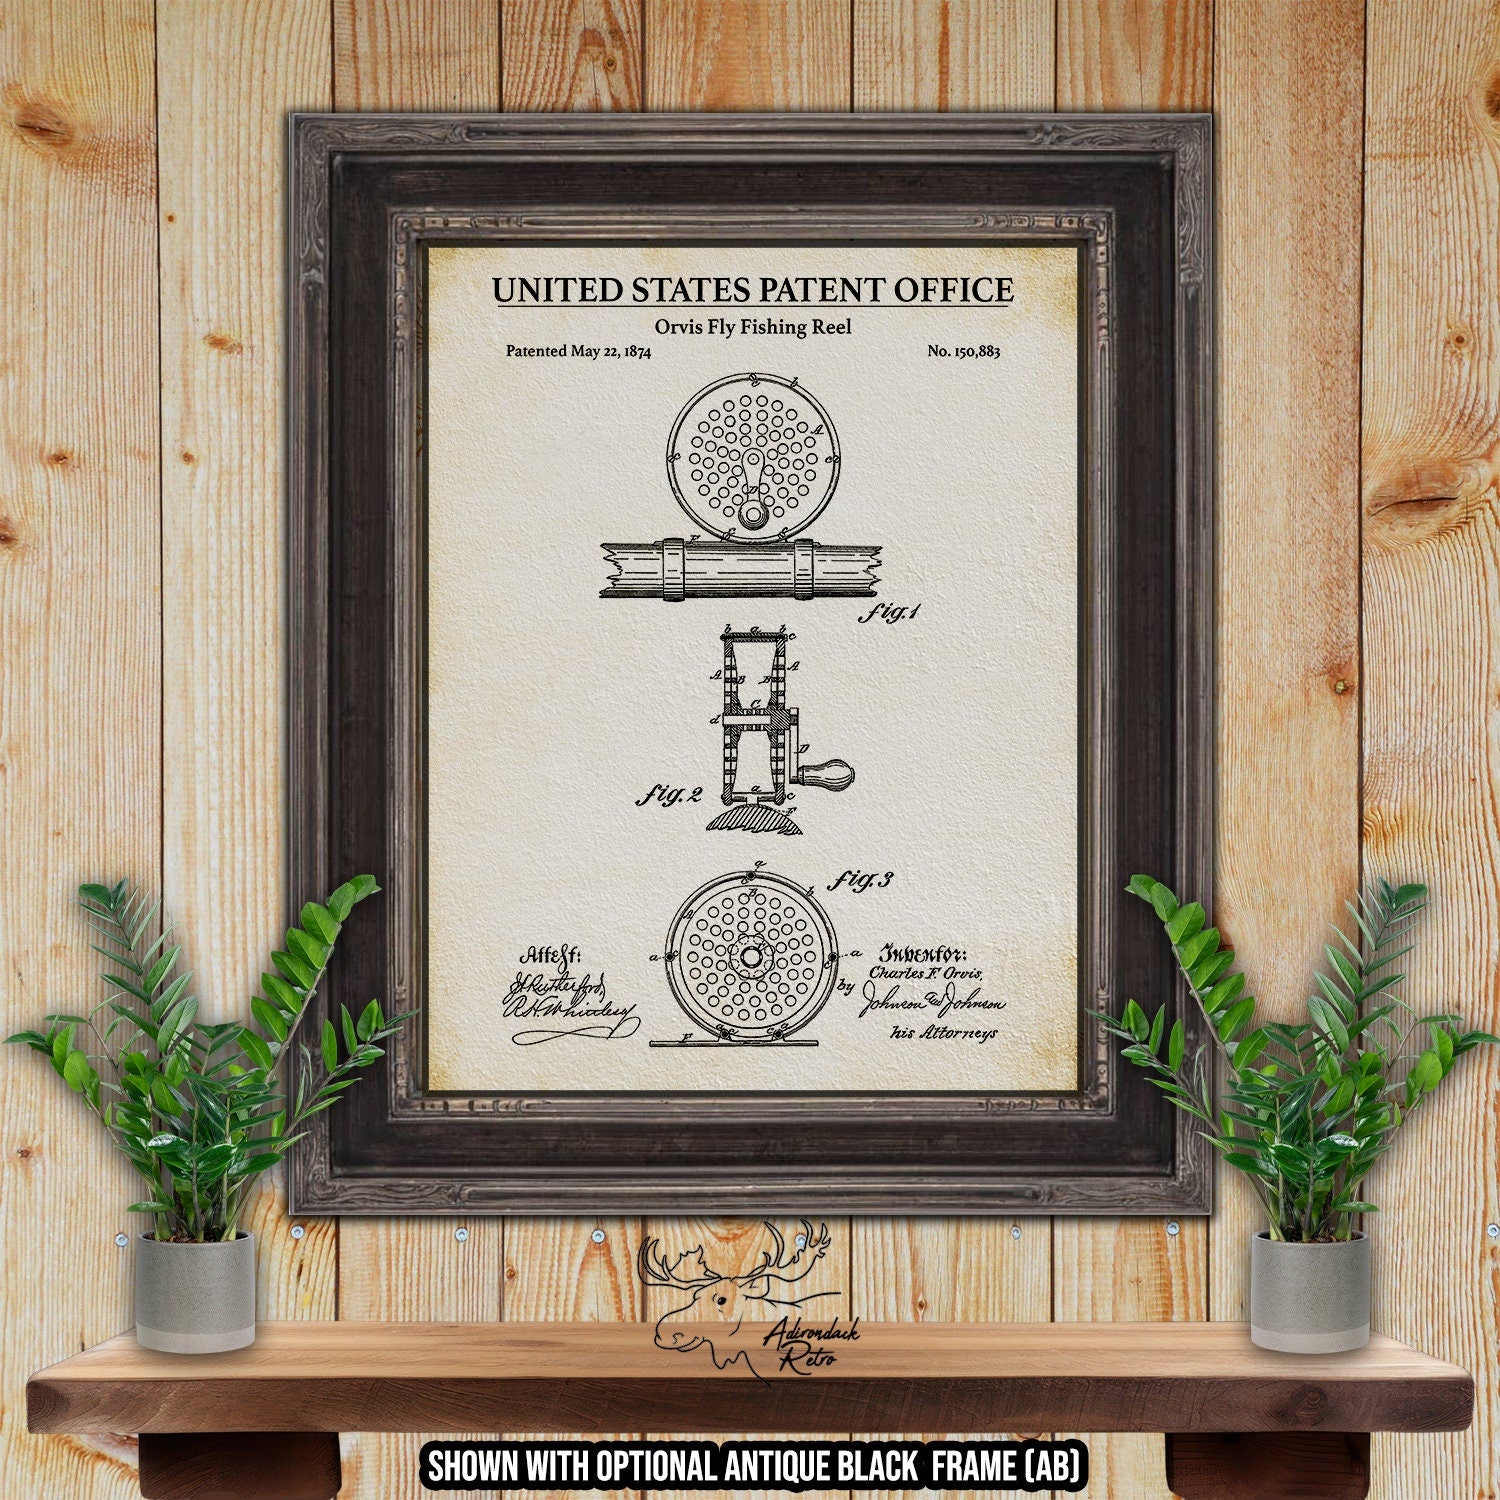 Fly Fishing Reel Patent Print - 1874 Fly Reel Invention at Adirondack Retro